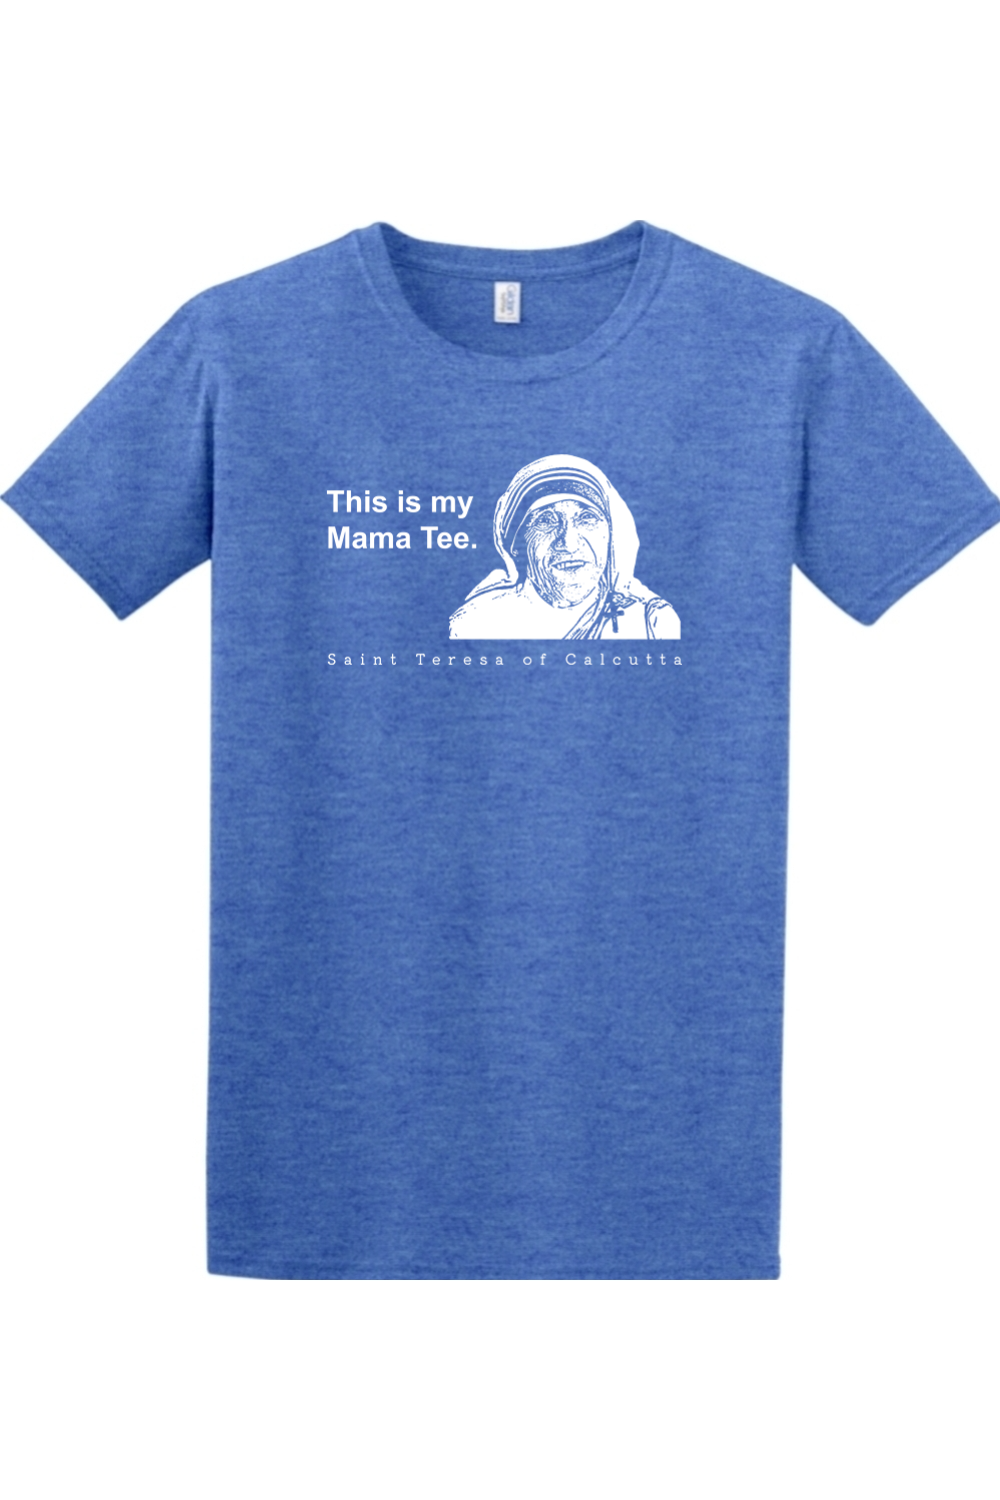 This is my Mama Tee - St. Teresa of Calcutta Adult T-Shirt